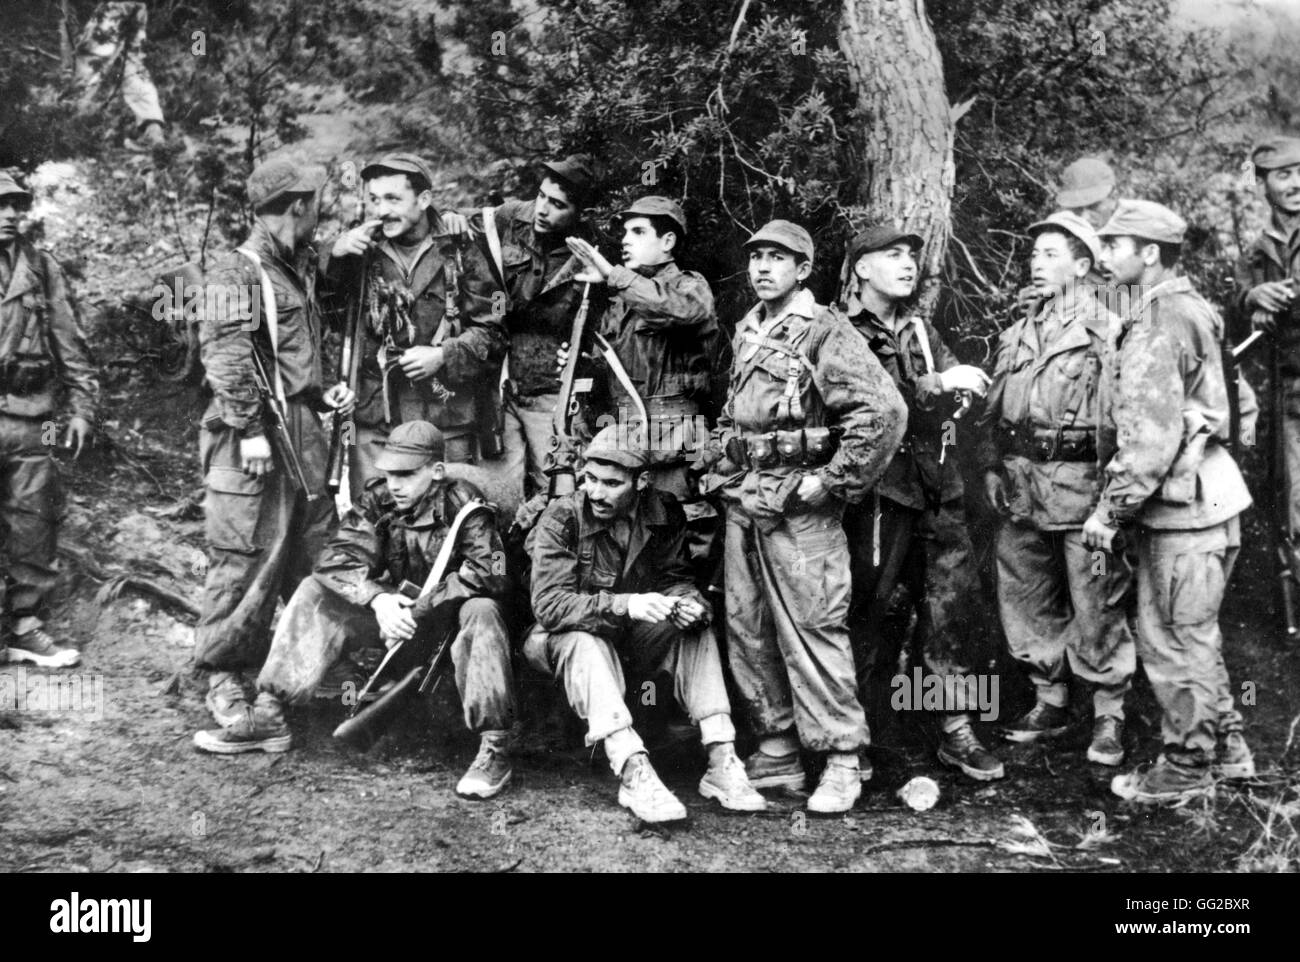 F.L.N. (National Liberation Front) soldiers  1954-1962 France - Algerian War of Independence Stock Photo